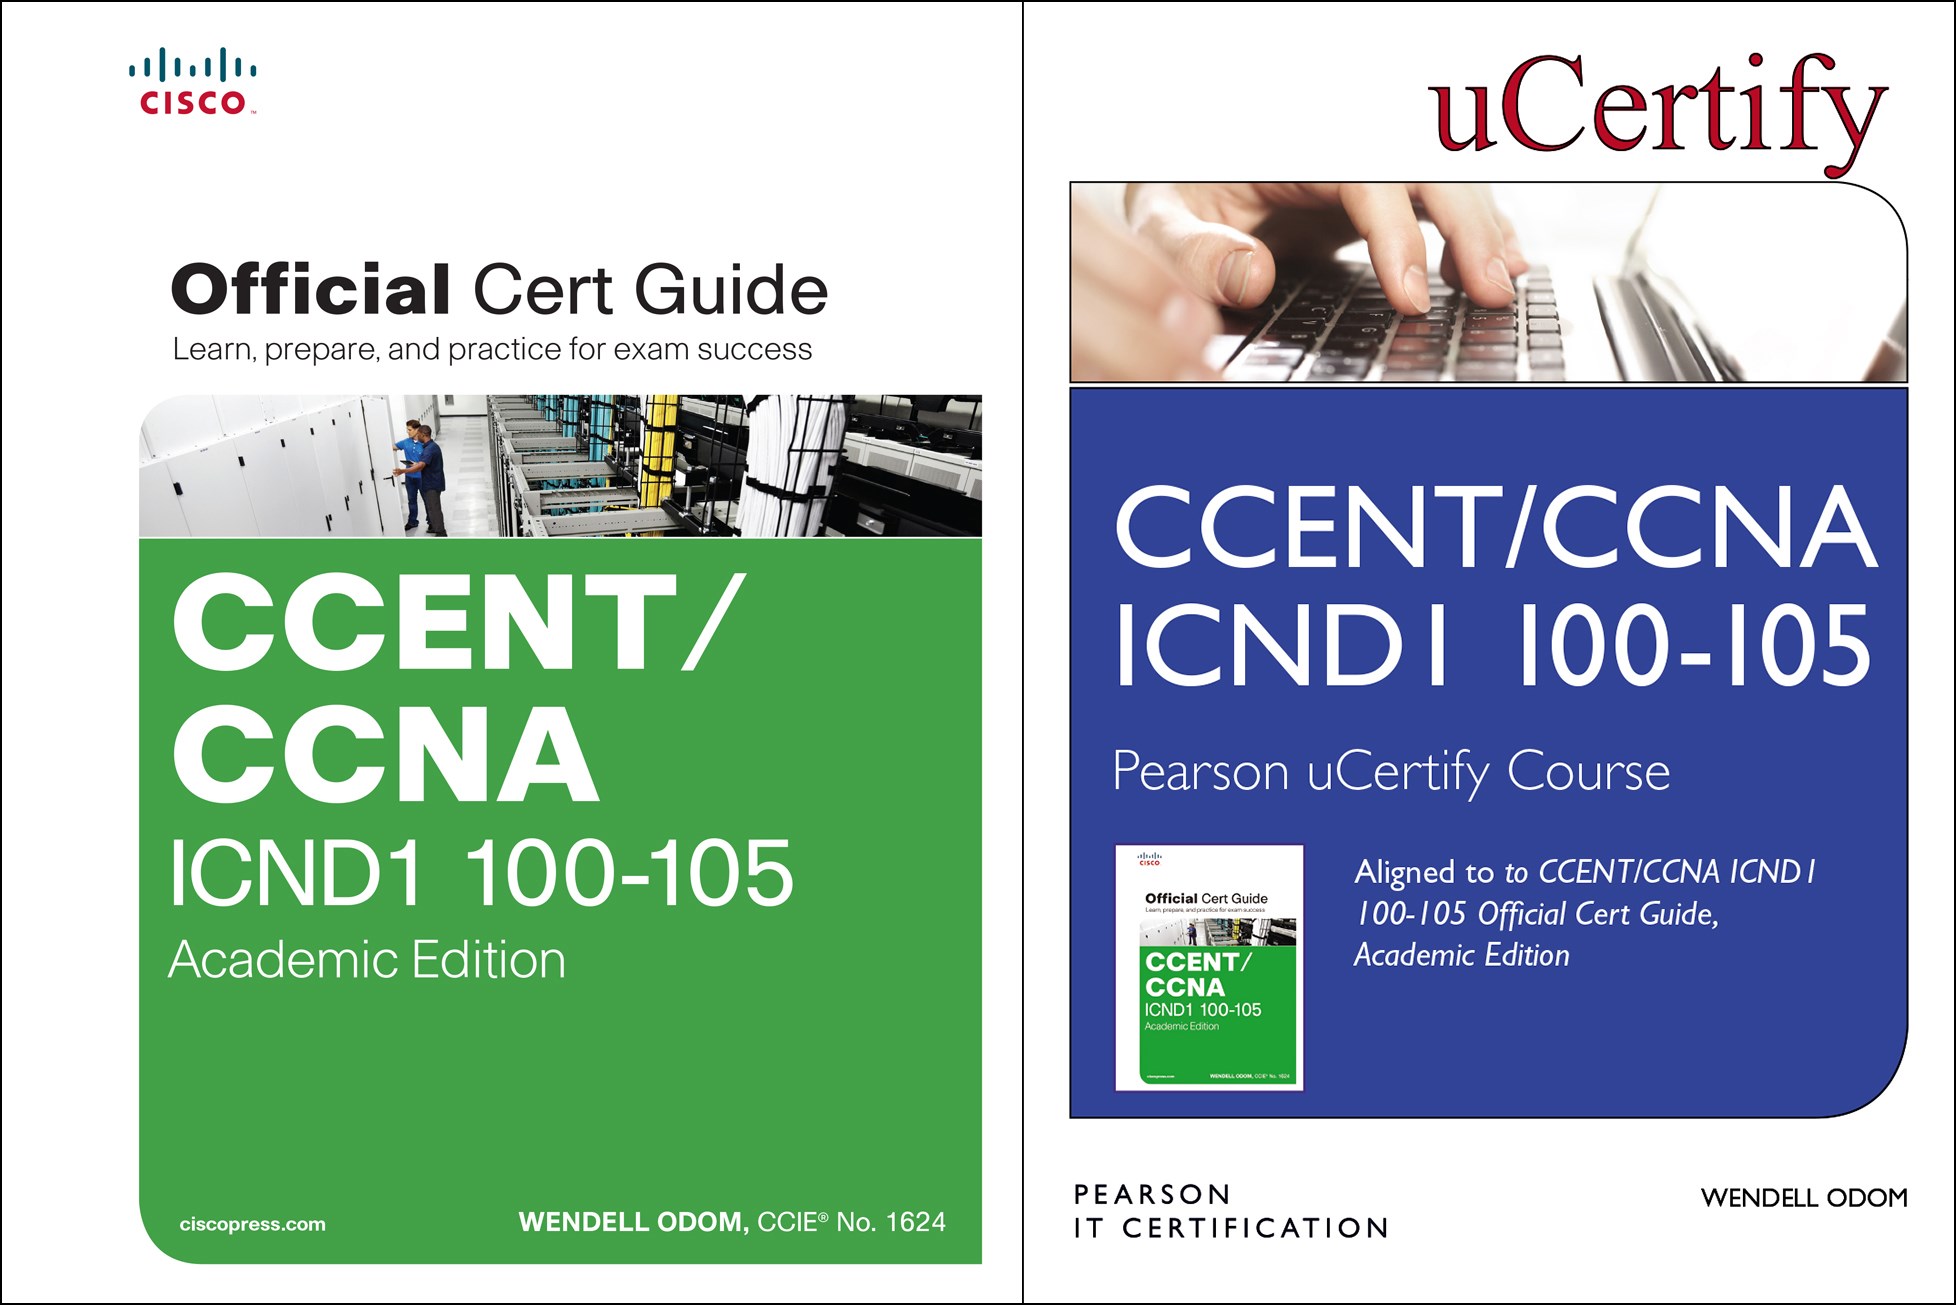 CCENT ICND1 100-105 Pearson uCertify Course and Textbook Academic Edition Bundle